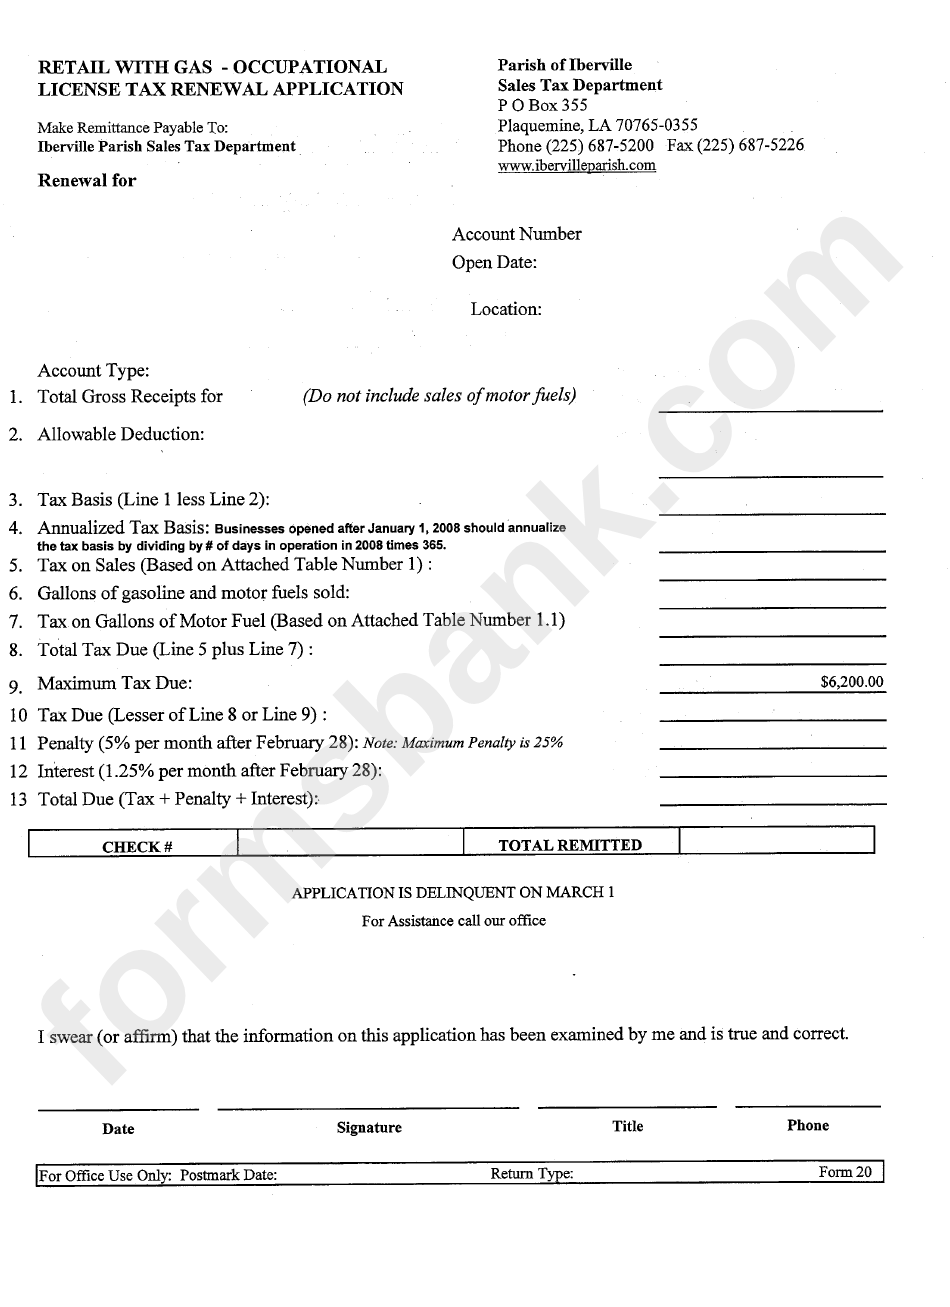 Form 20 - Retail With Gas - Occupational License Tax Renewal Application